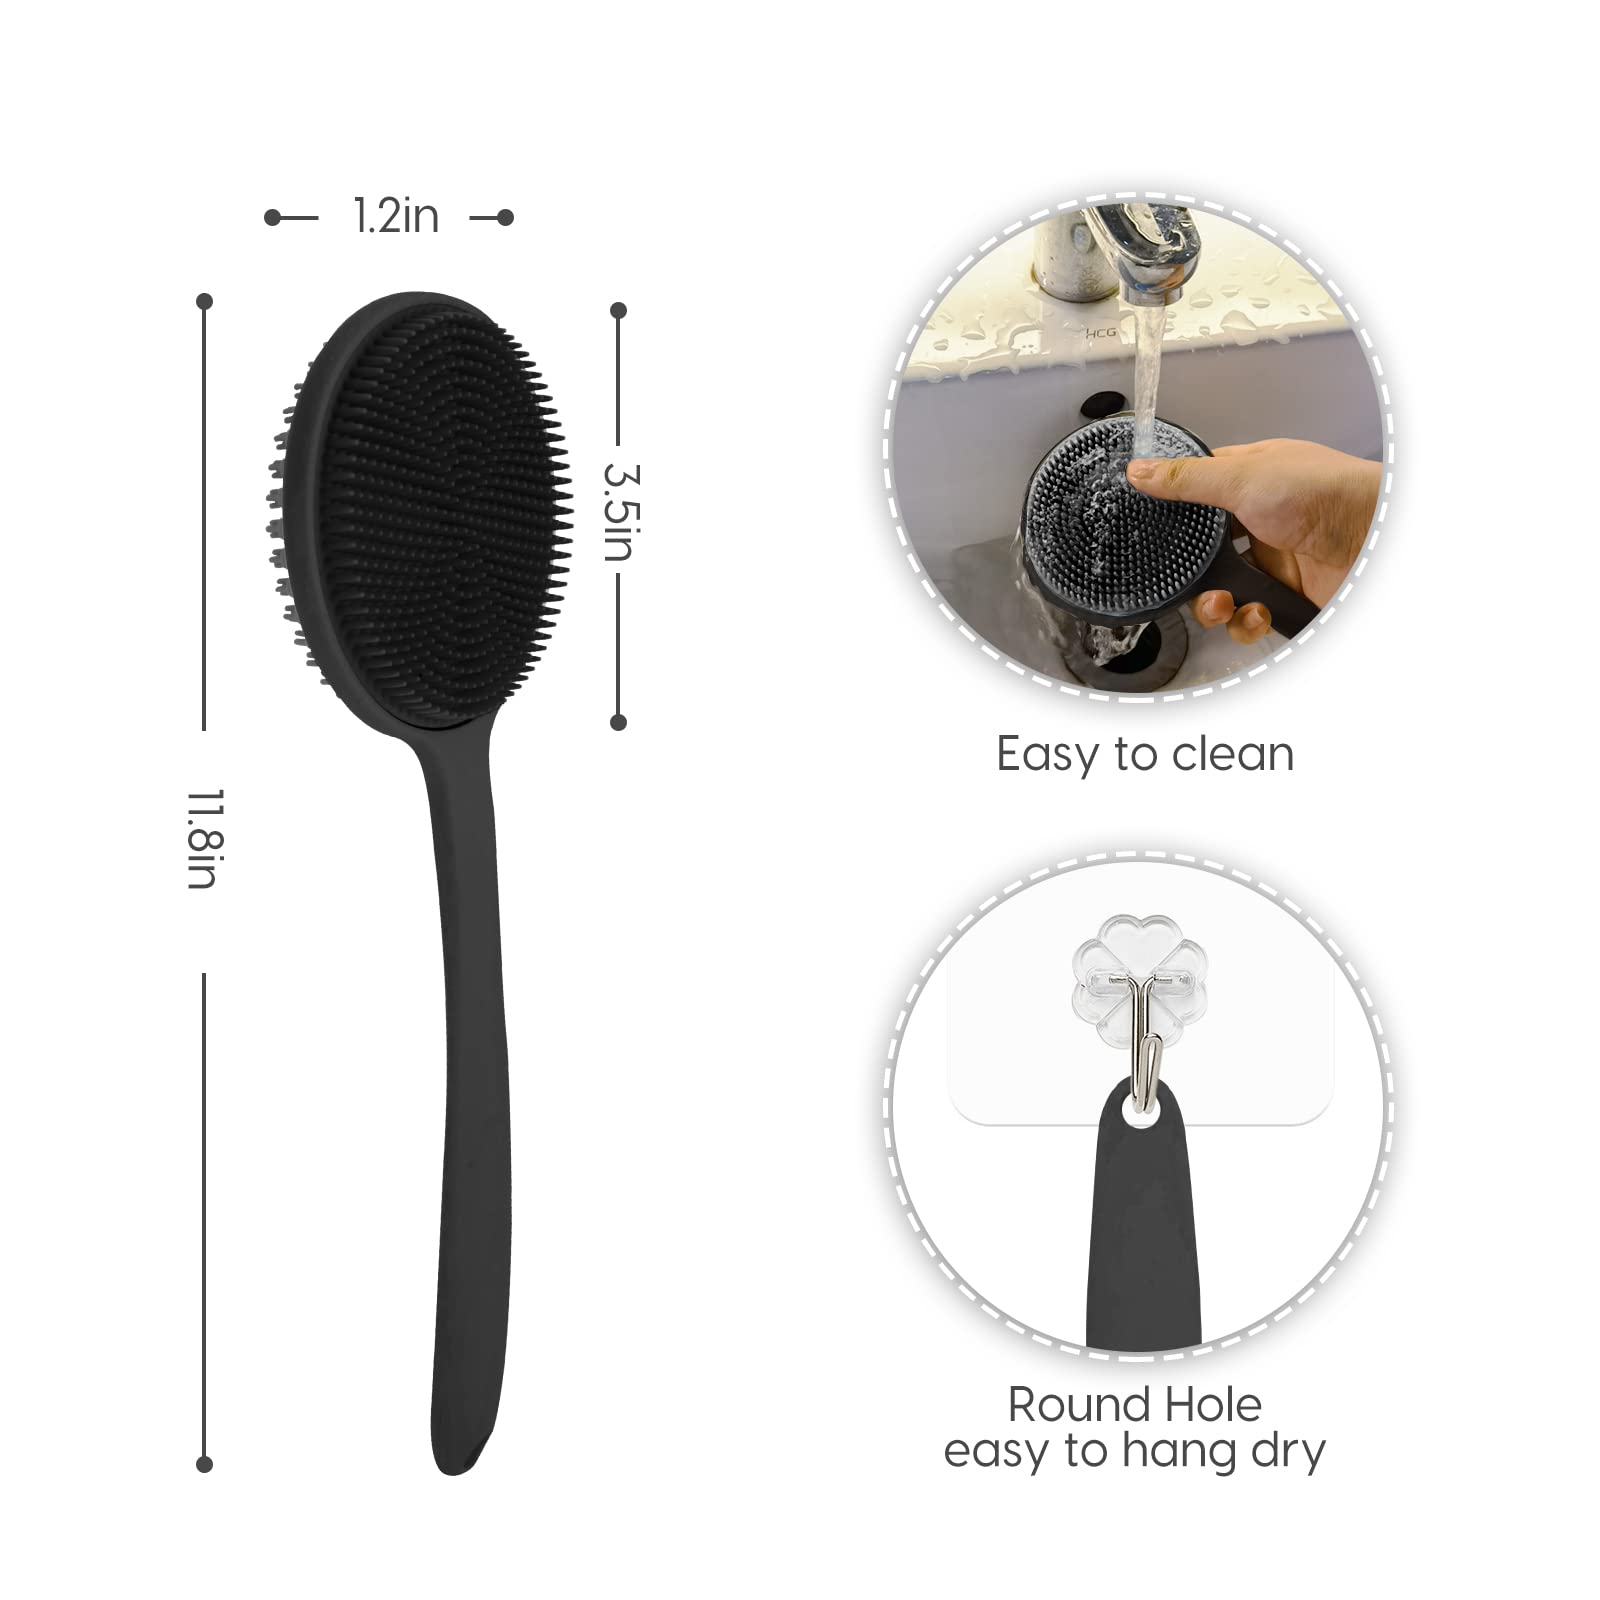 Silicone Back Scrubber for Shower, Bath Body Brush with Long Handle, Double Sided Shower Brush for Shower Exfoliating and Massage Can Produce Rich Foam, Long Handle Back Scrubber for Men and Women